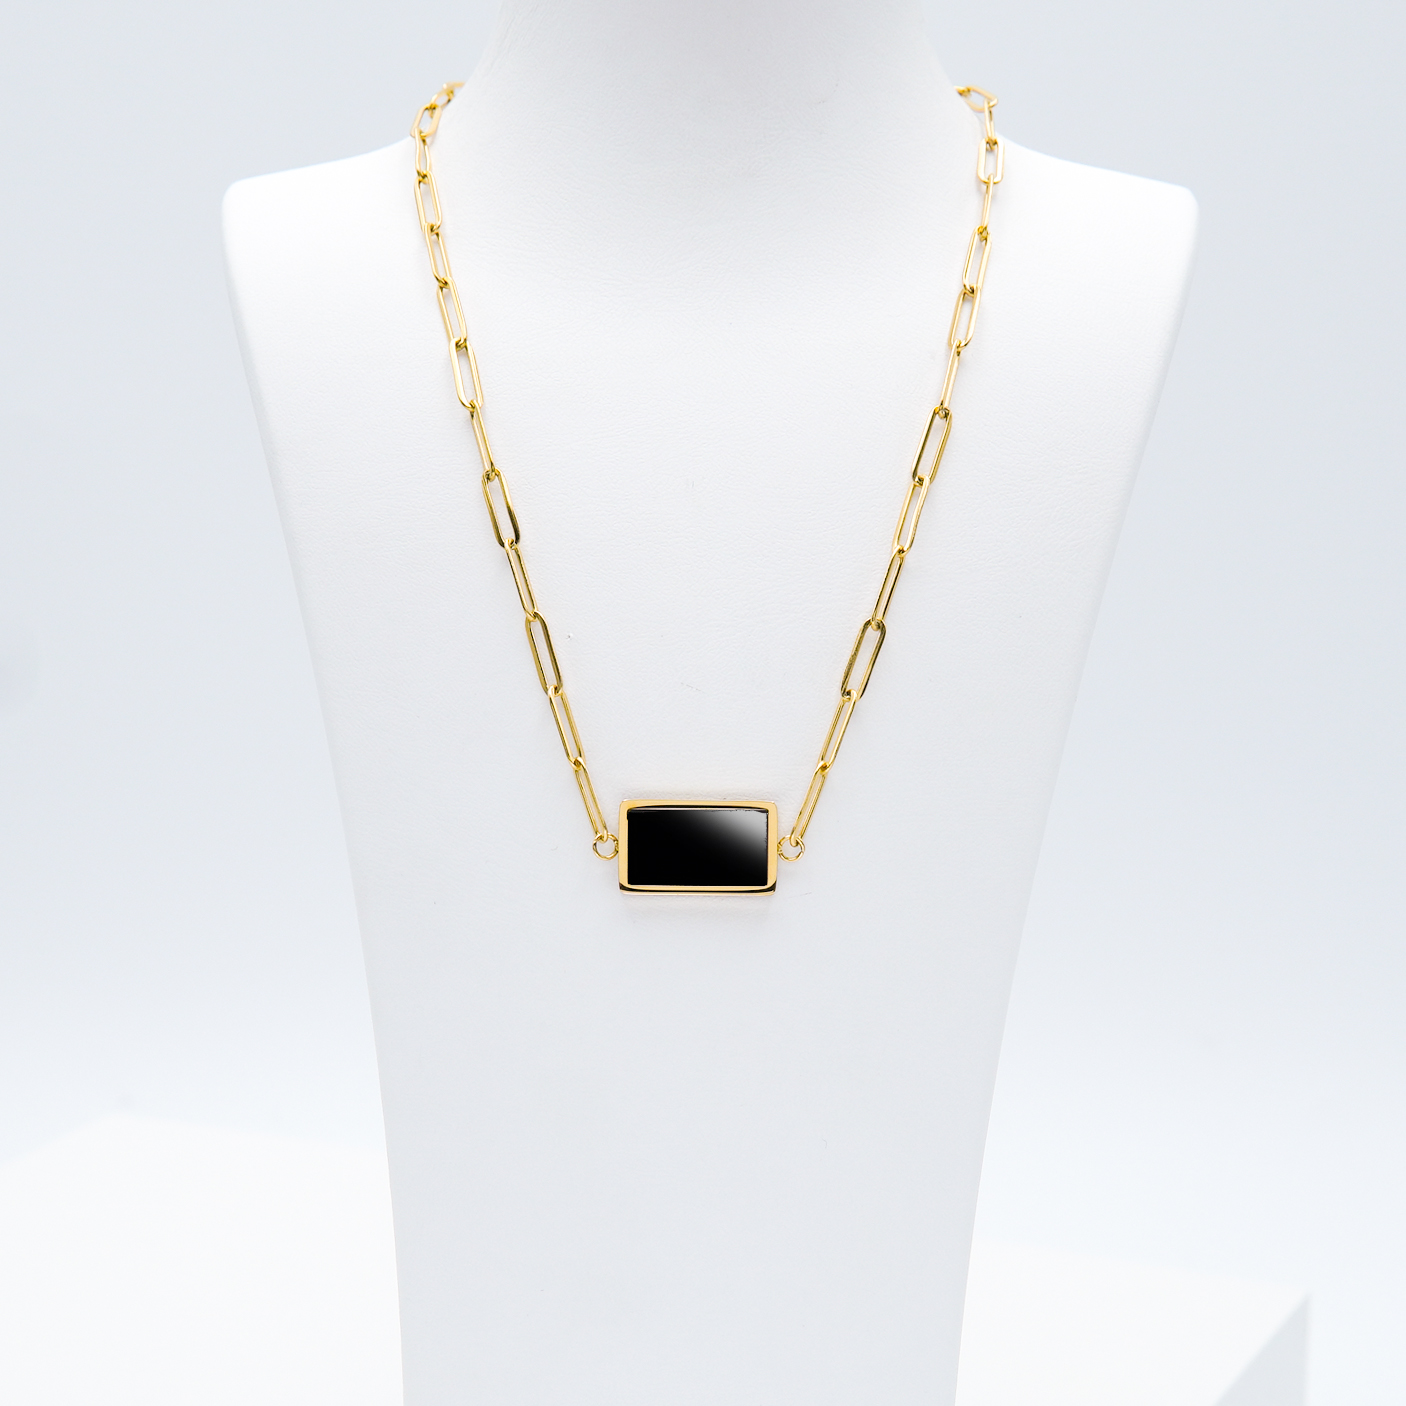 2- Gold in night Gold Edition Halsband Modern and trendy Necklace and women jewelry and accessories from SWEVALI fashion Sweden